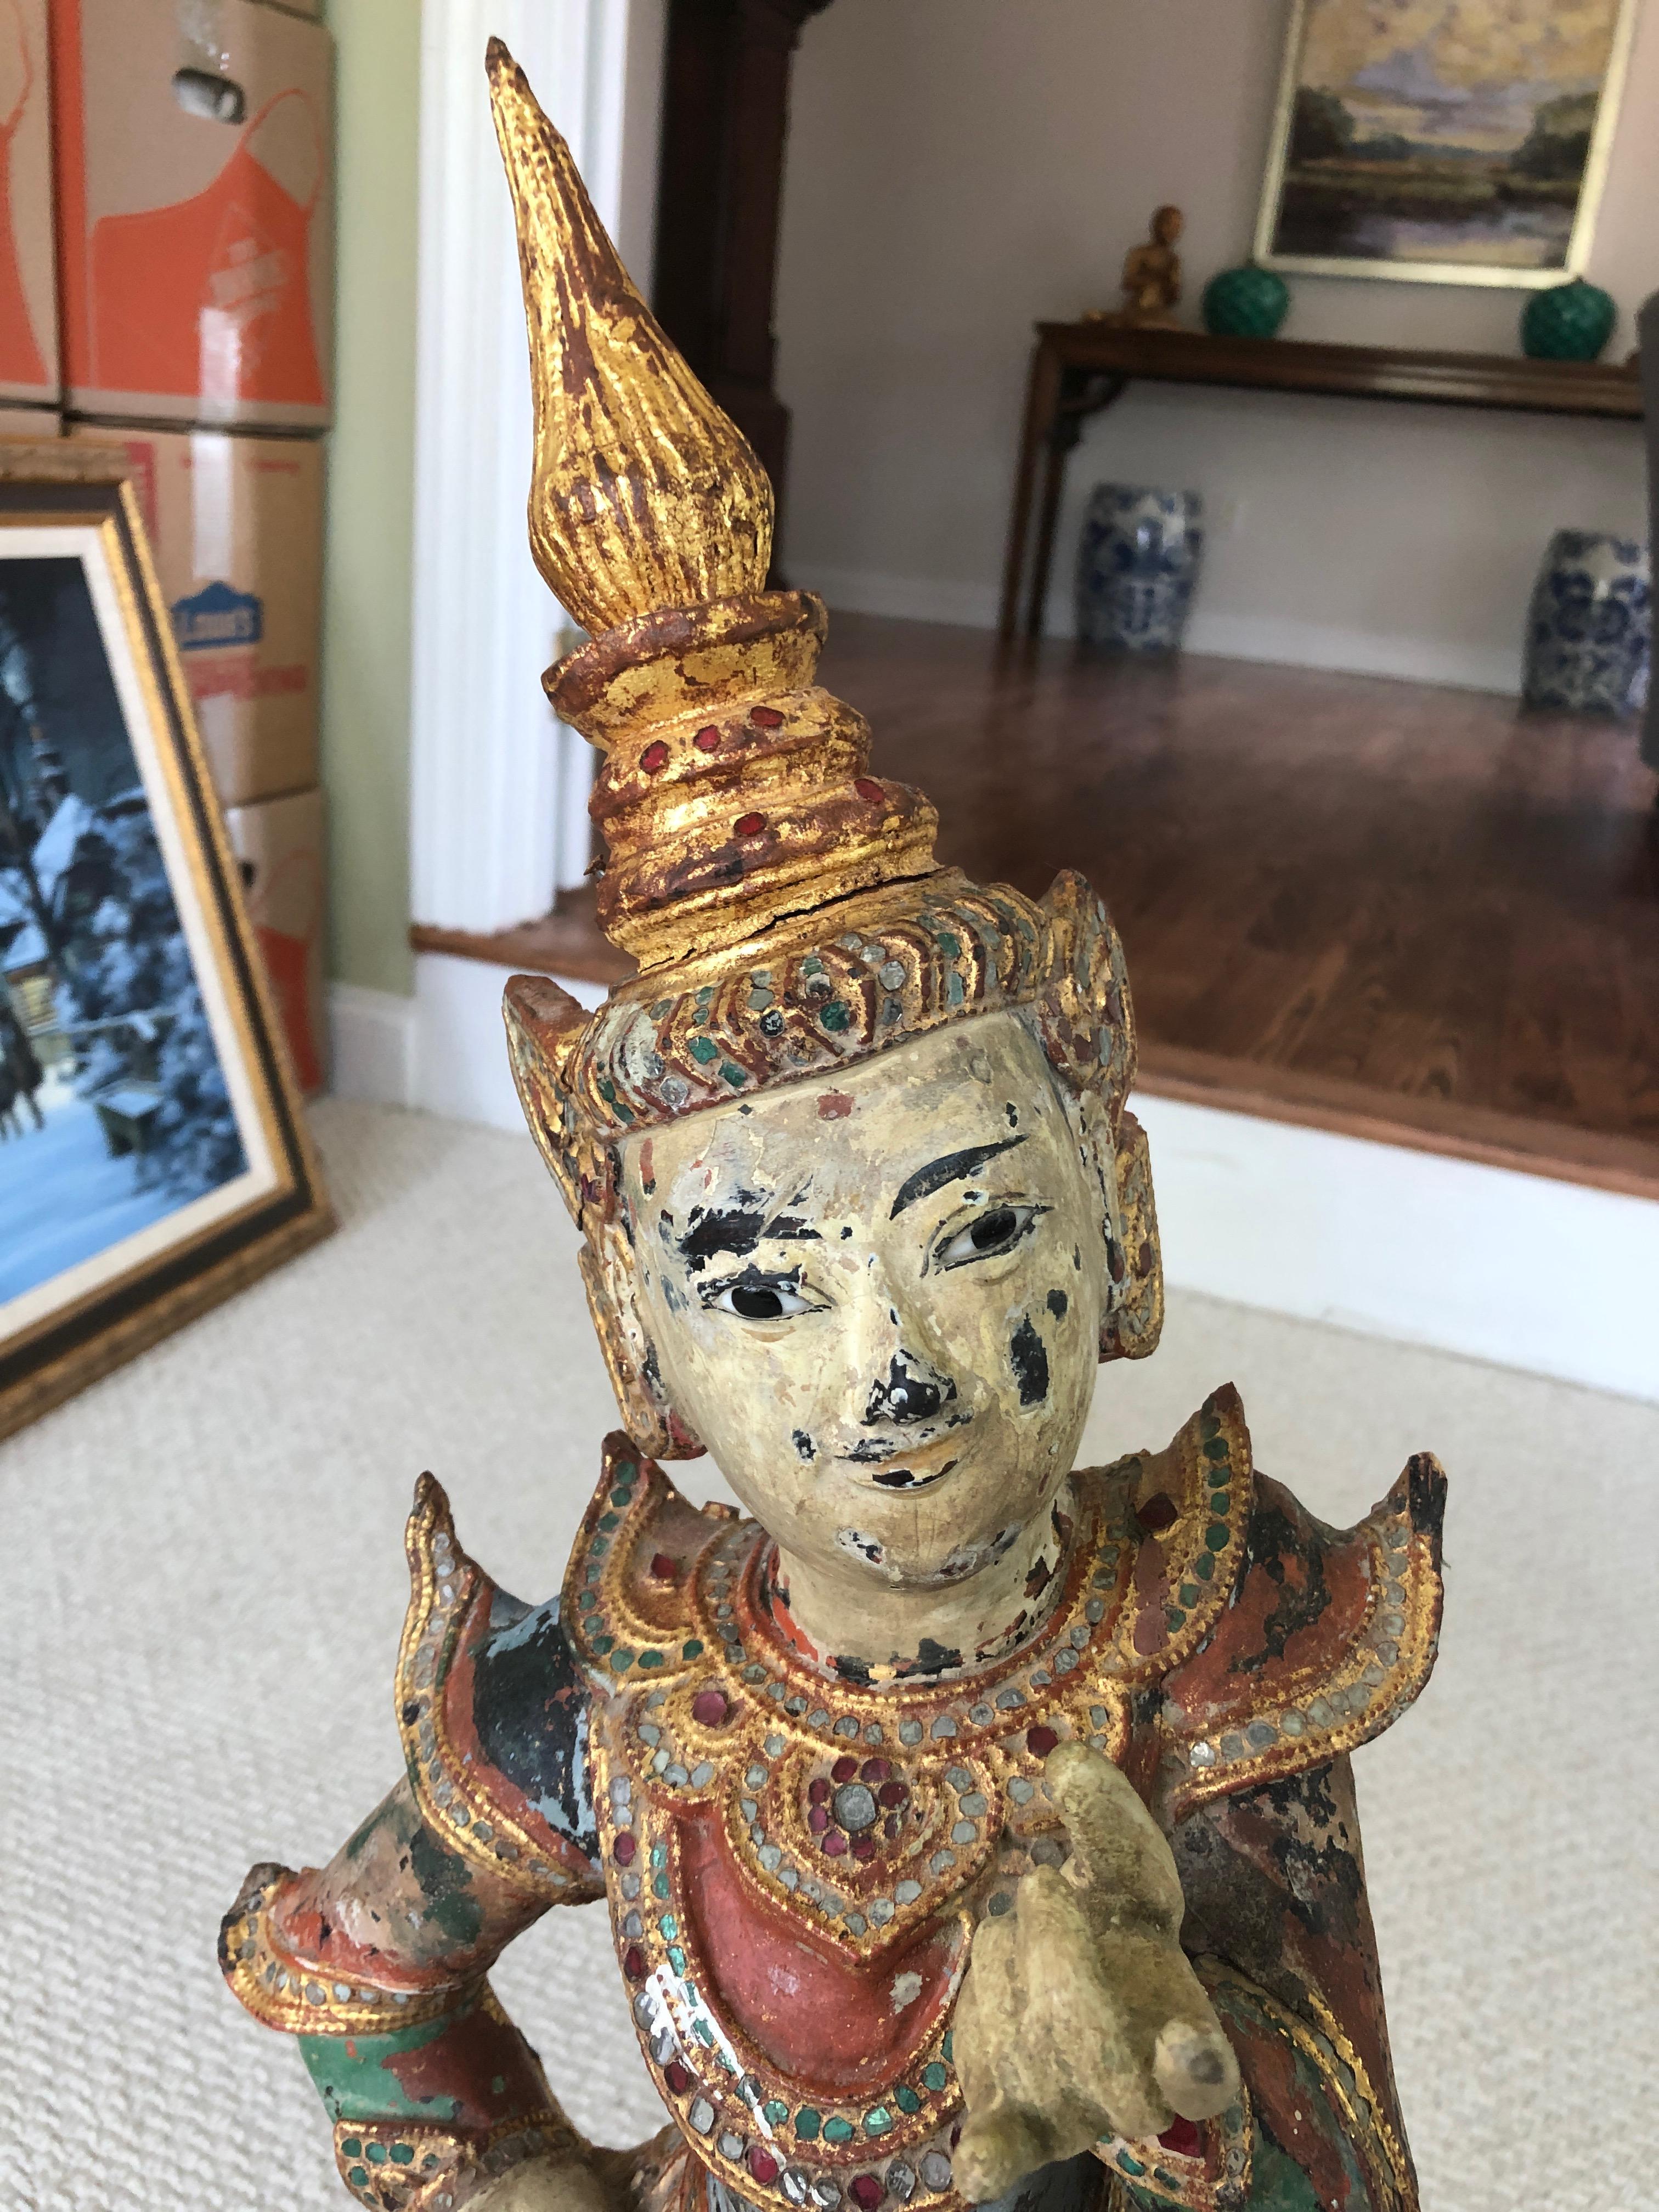 A charming Burmese dancing figure carved from wood and hand painted as well as gilded. The gestures are lovely in hands and feet, and the weathered condition adds to the character and proof of age.